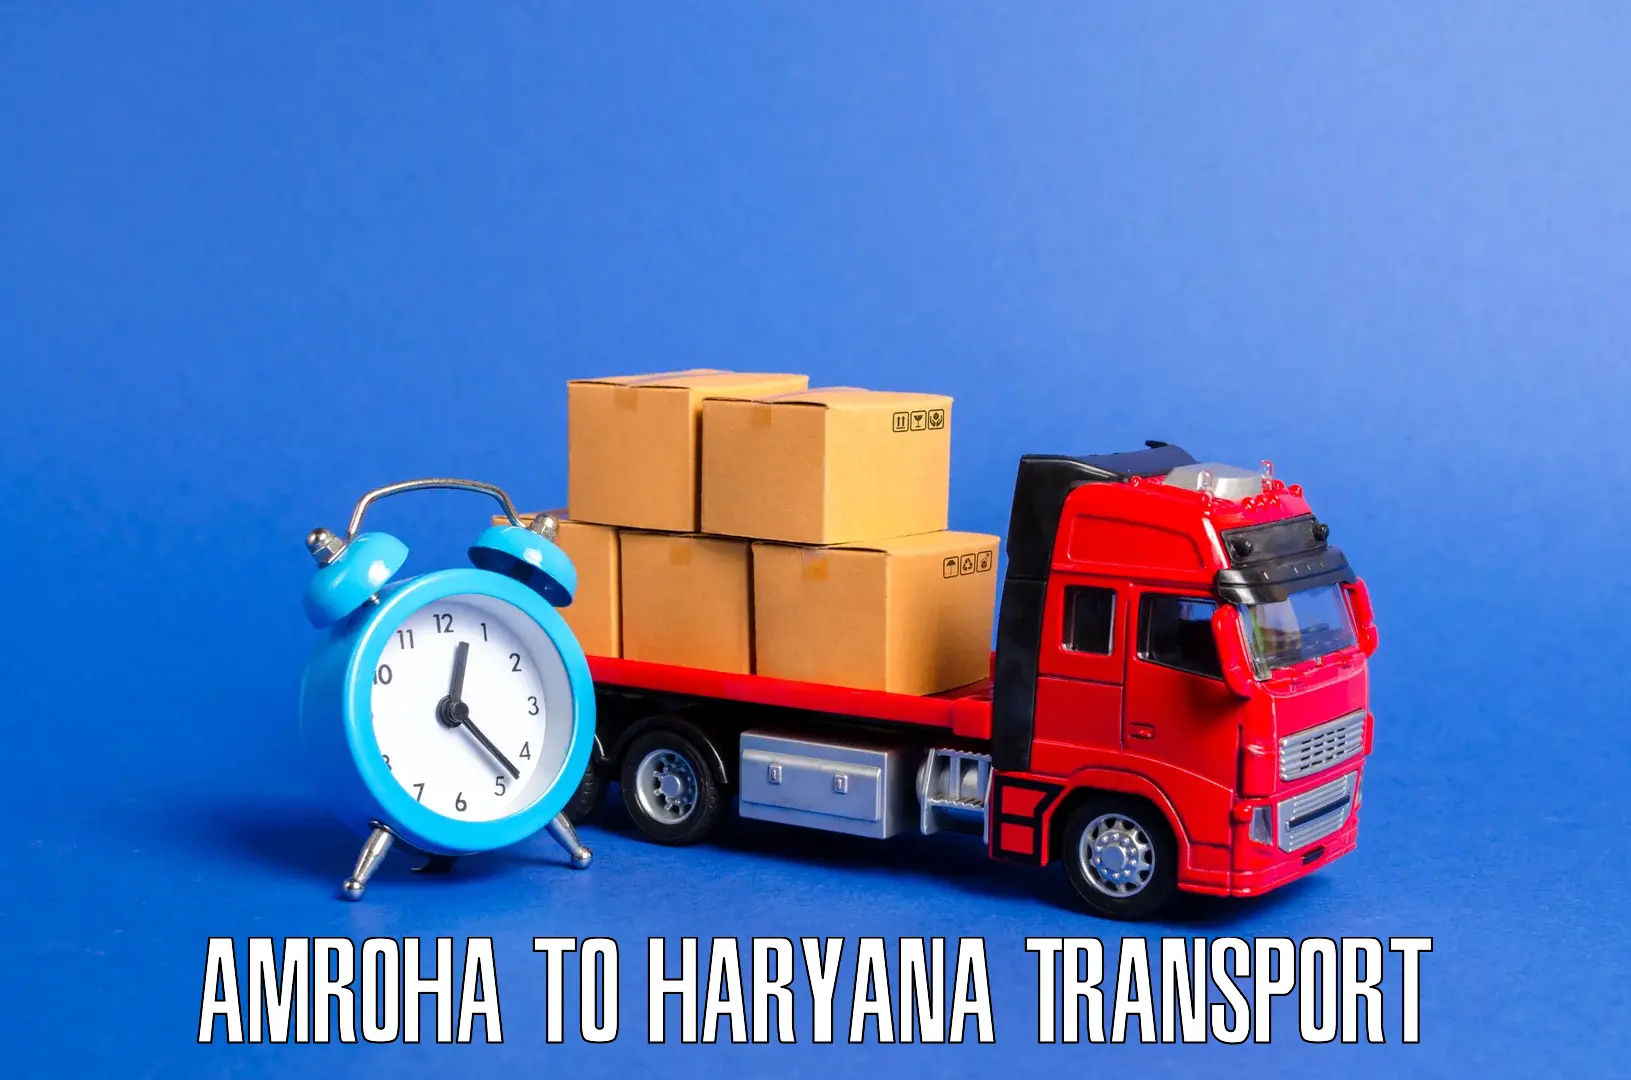 Air freight transport services Amroha to Fatehabad